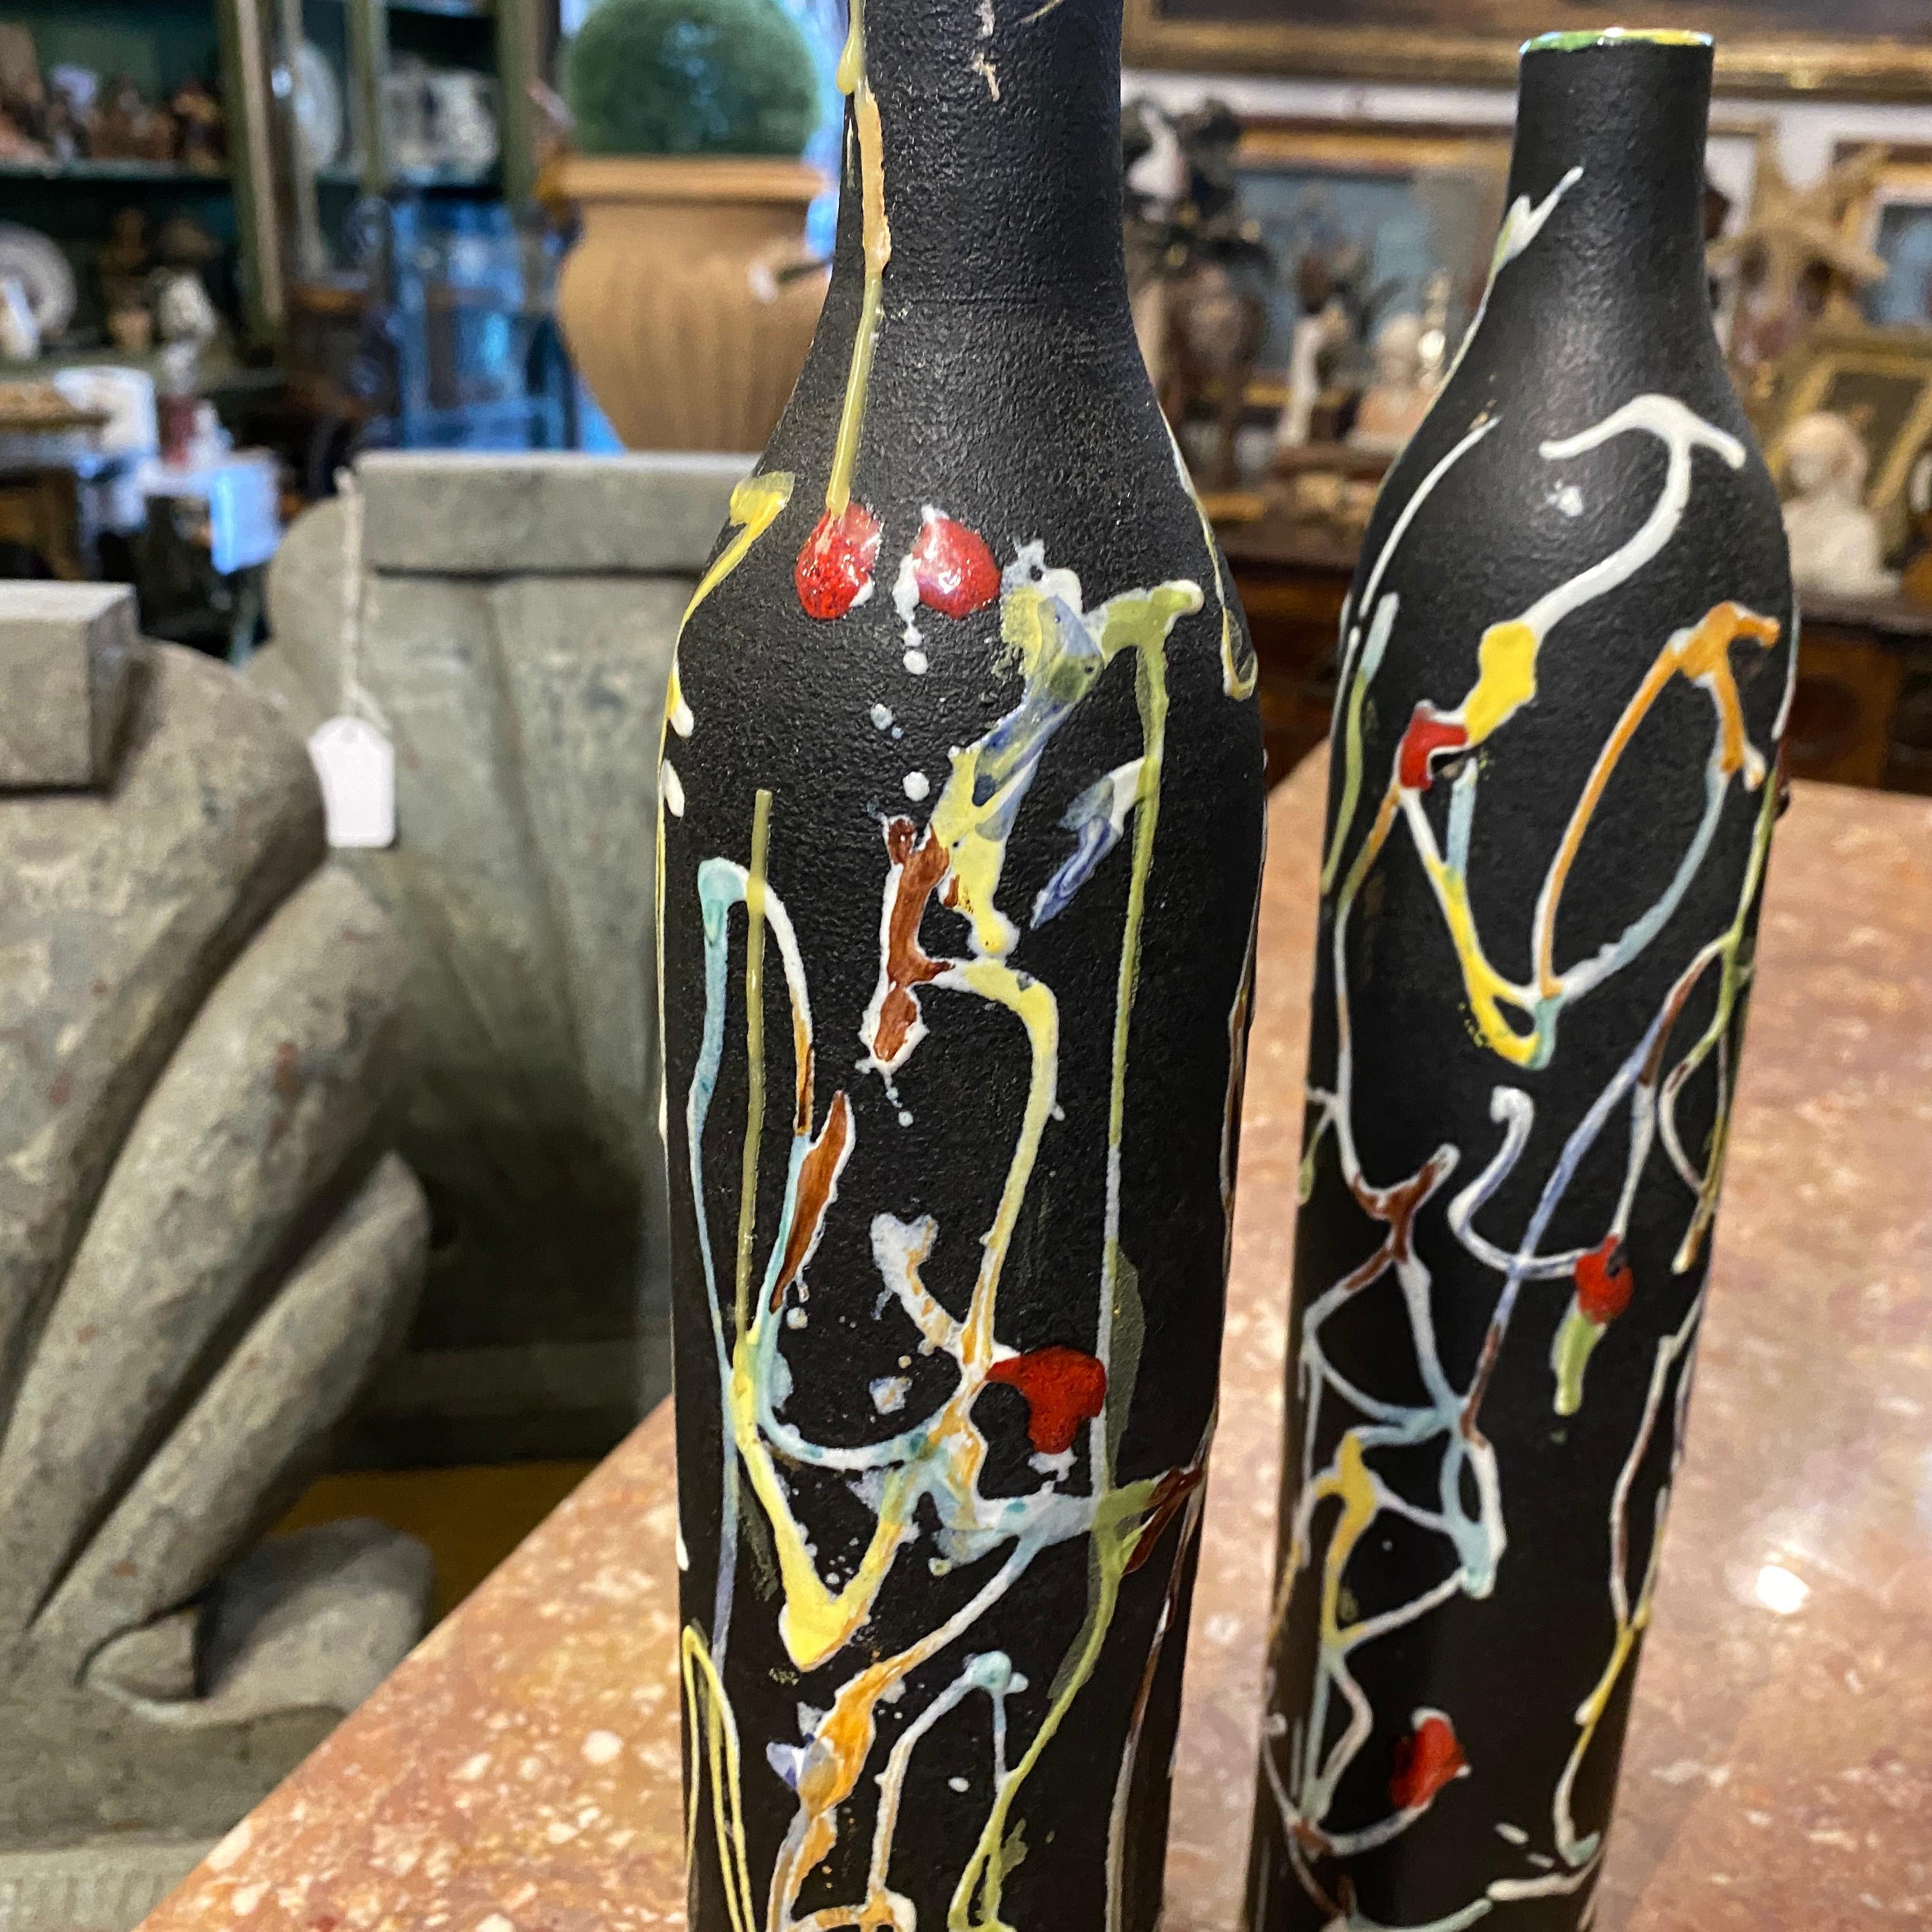 Two hand-painted ceramic bottle vases manufactured in Italy in the 1970s for Millefiori Cucchi, famous Italian liquor, by Ce.As Albisola. These Bottle Vases by Ce.As Albisola are a testament to the enduring appeal of Italian ceramics and the